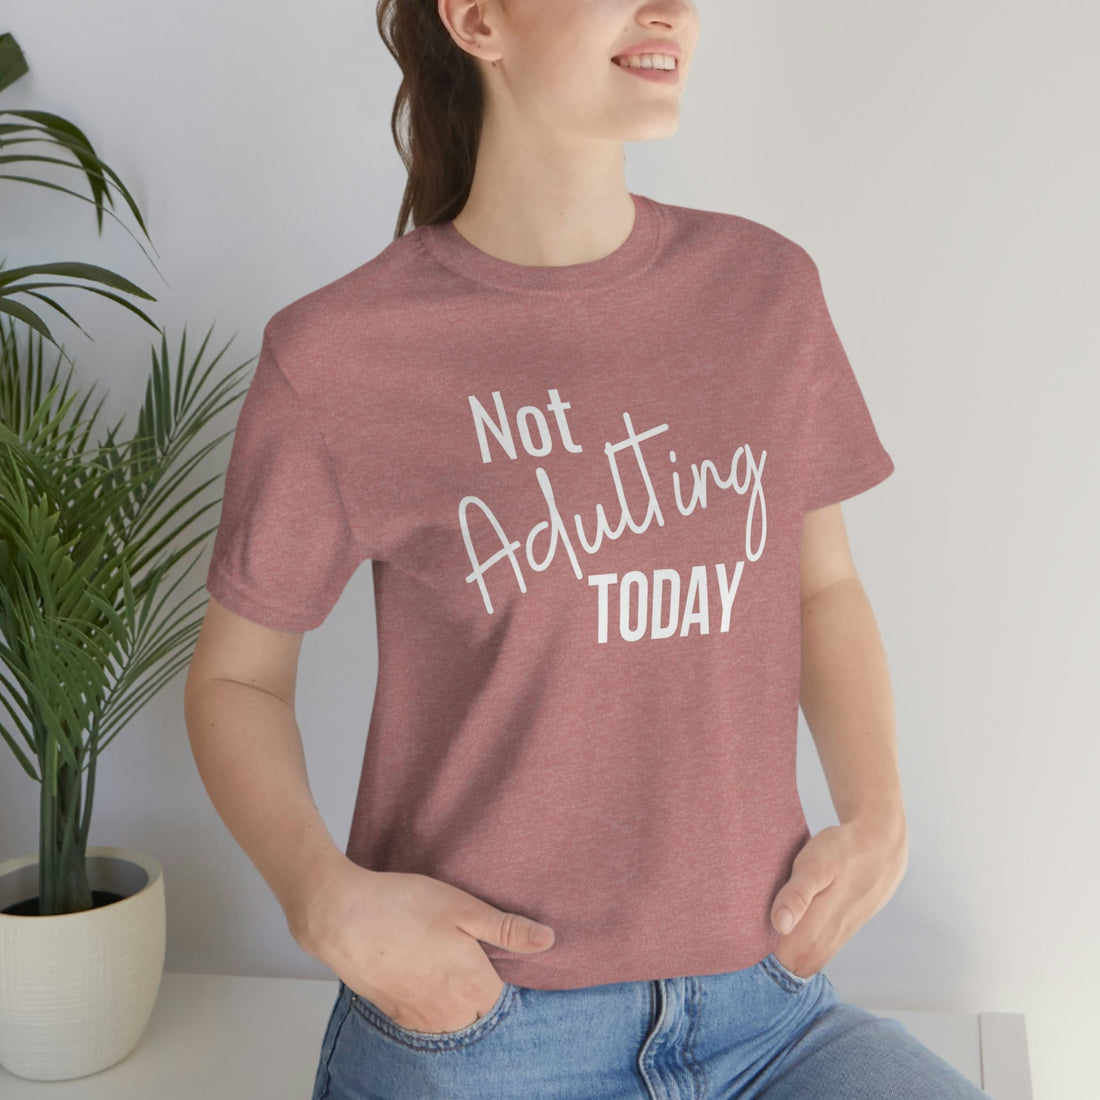 Not Adulting Today - T-Shirt - Positively Sassy - Not Adulting Today